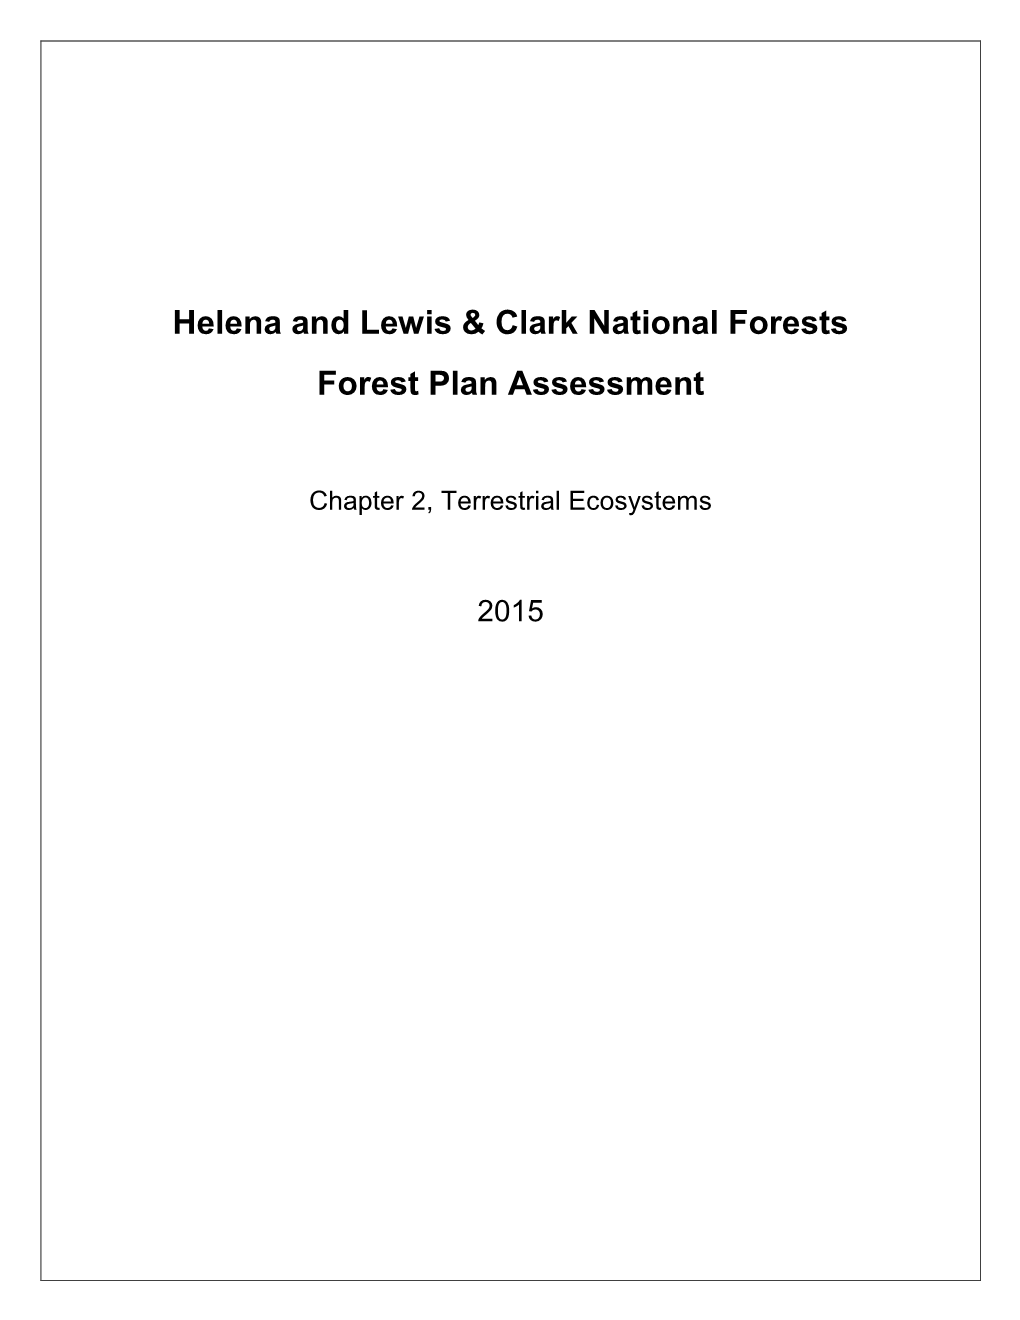 Helena and Lewis & Clark National Forests Forest Plan Assessment